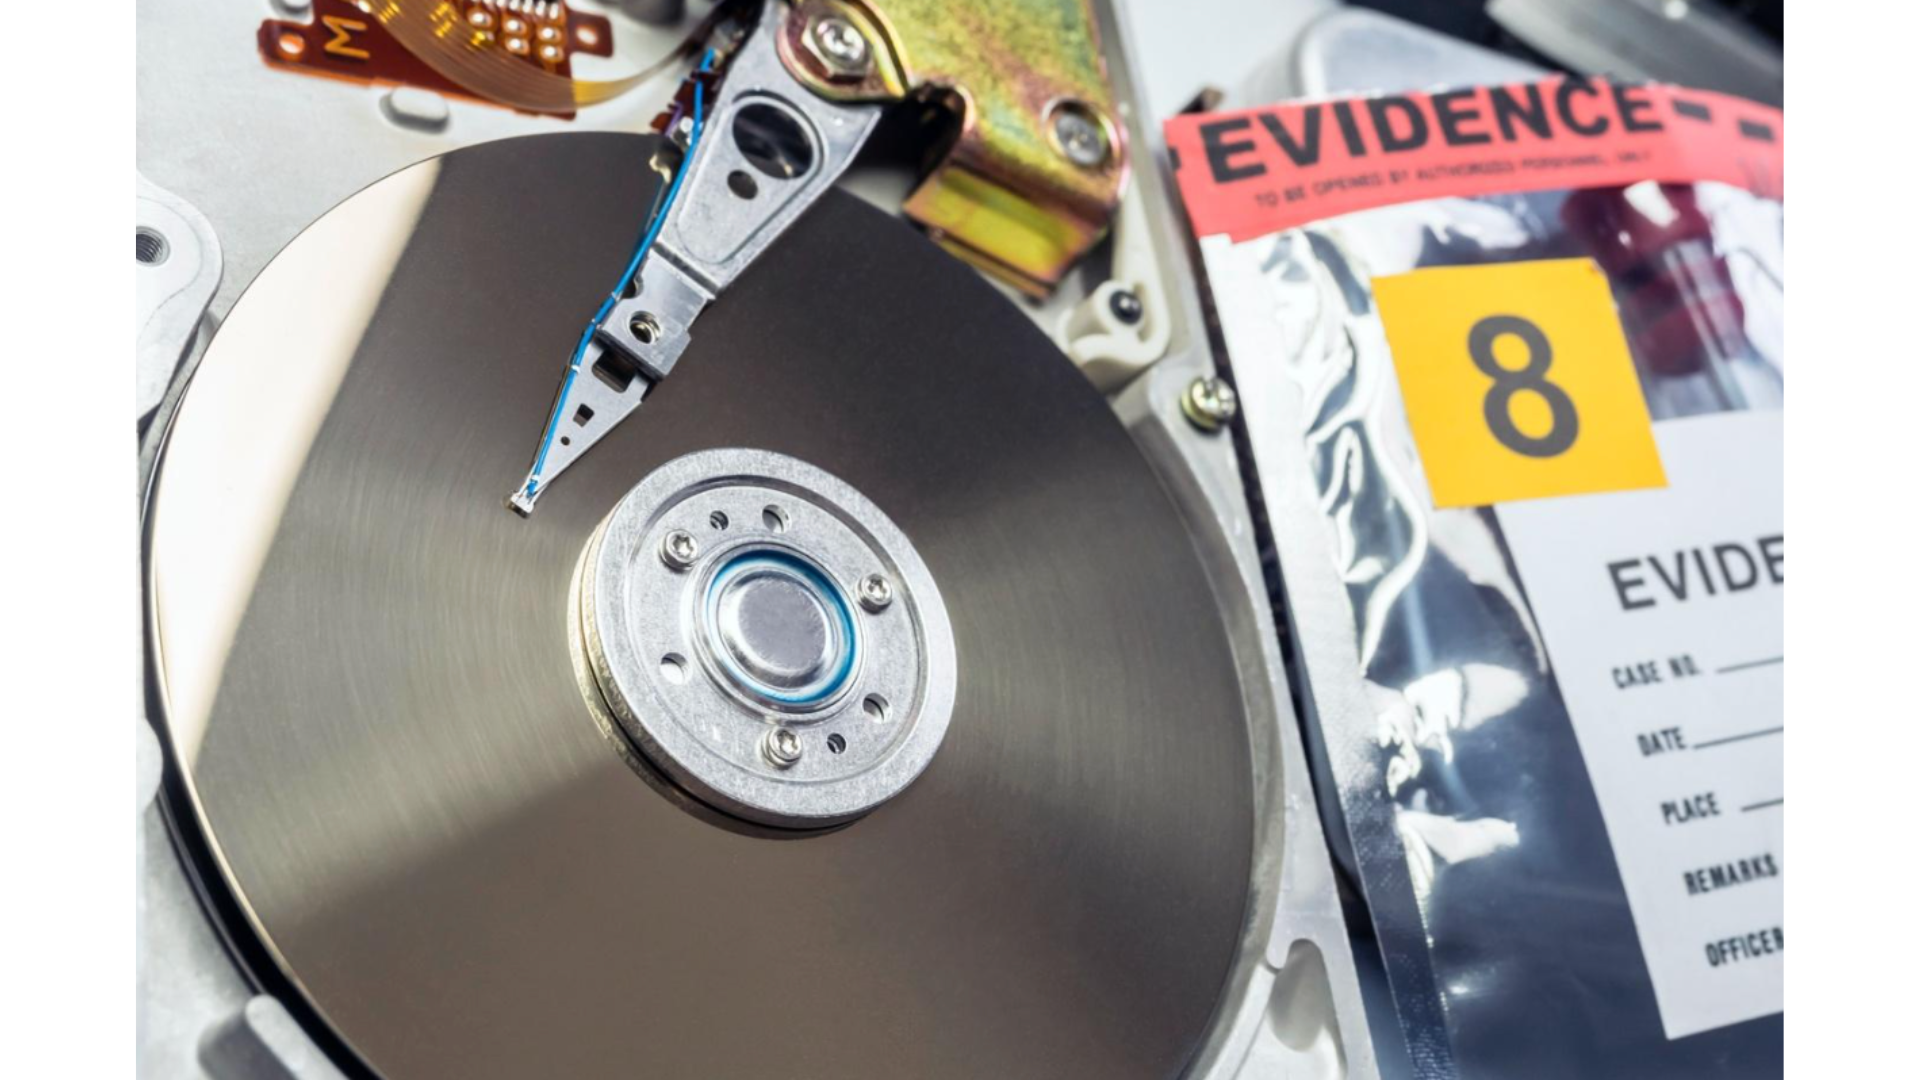 A hard drive removed from computer and stored as evidence.